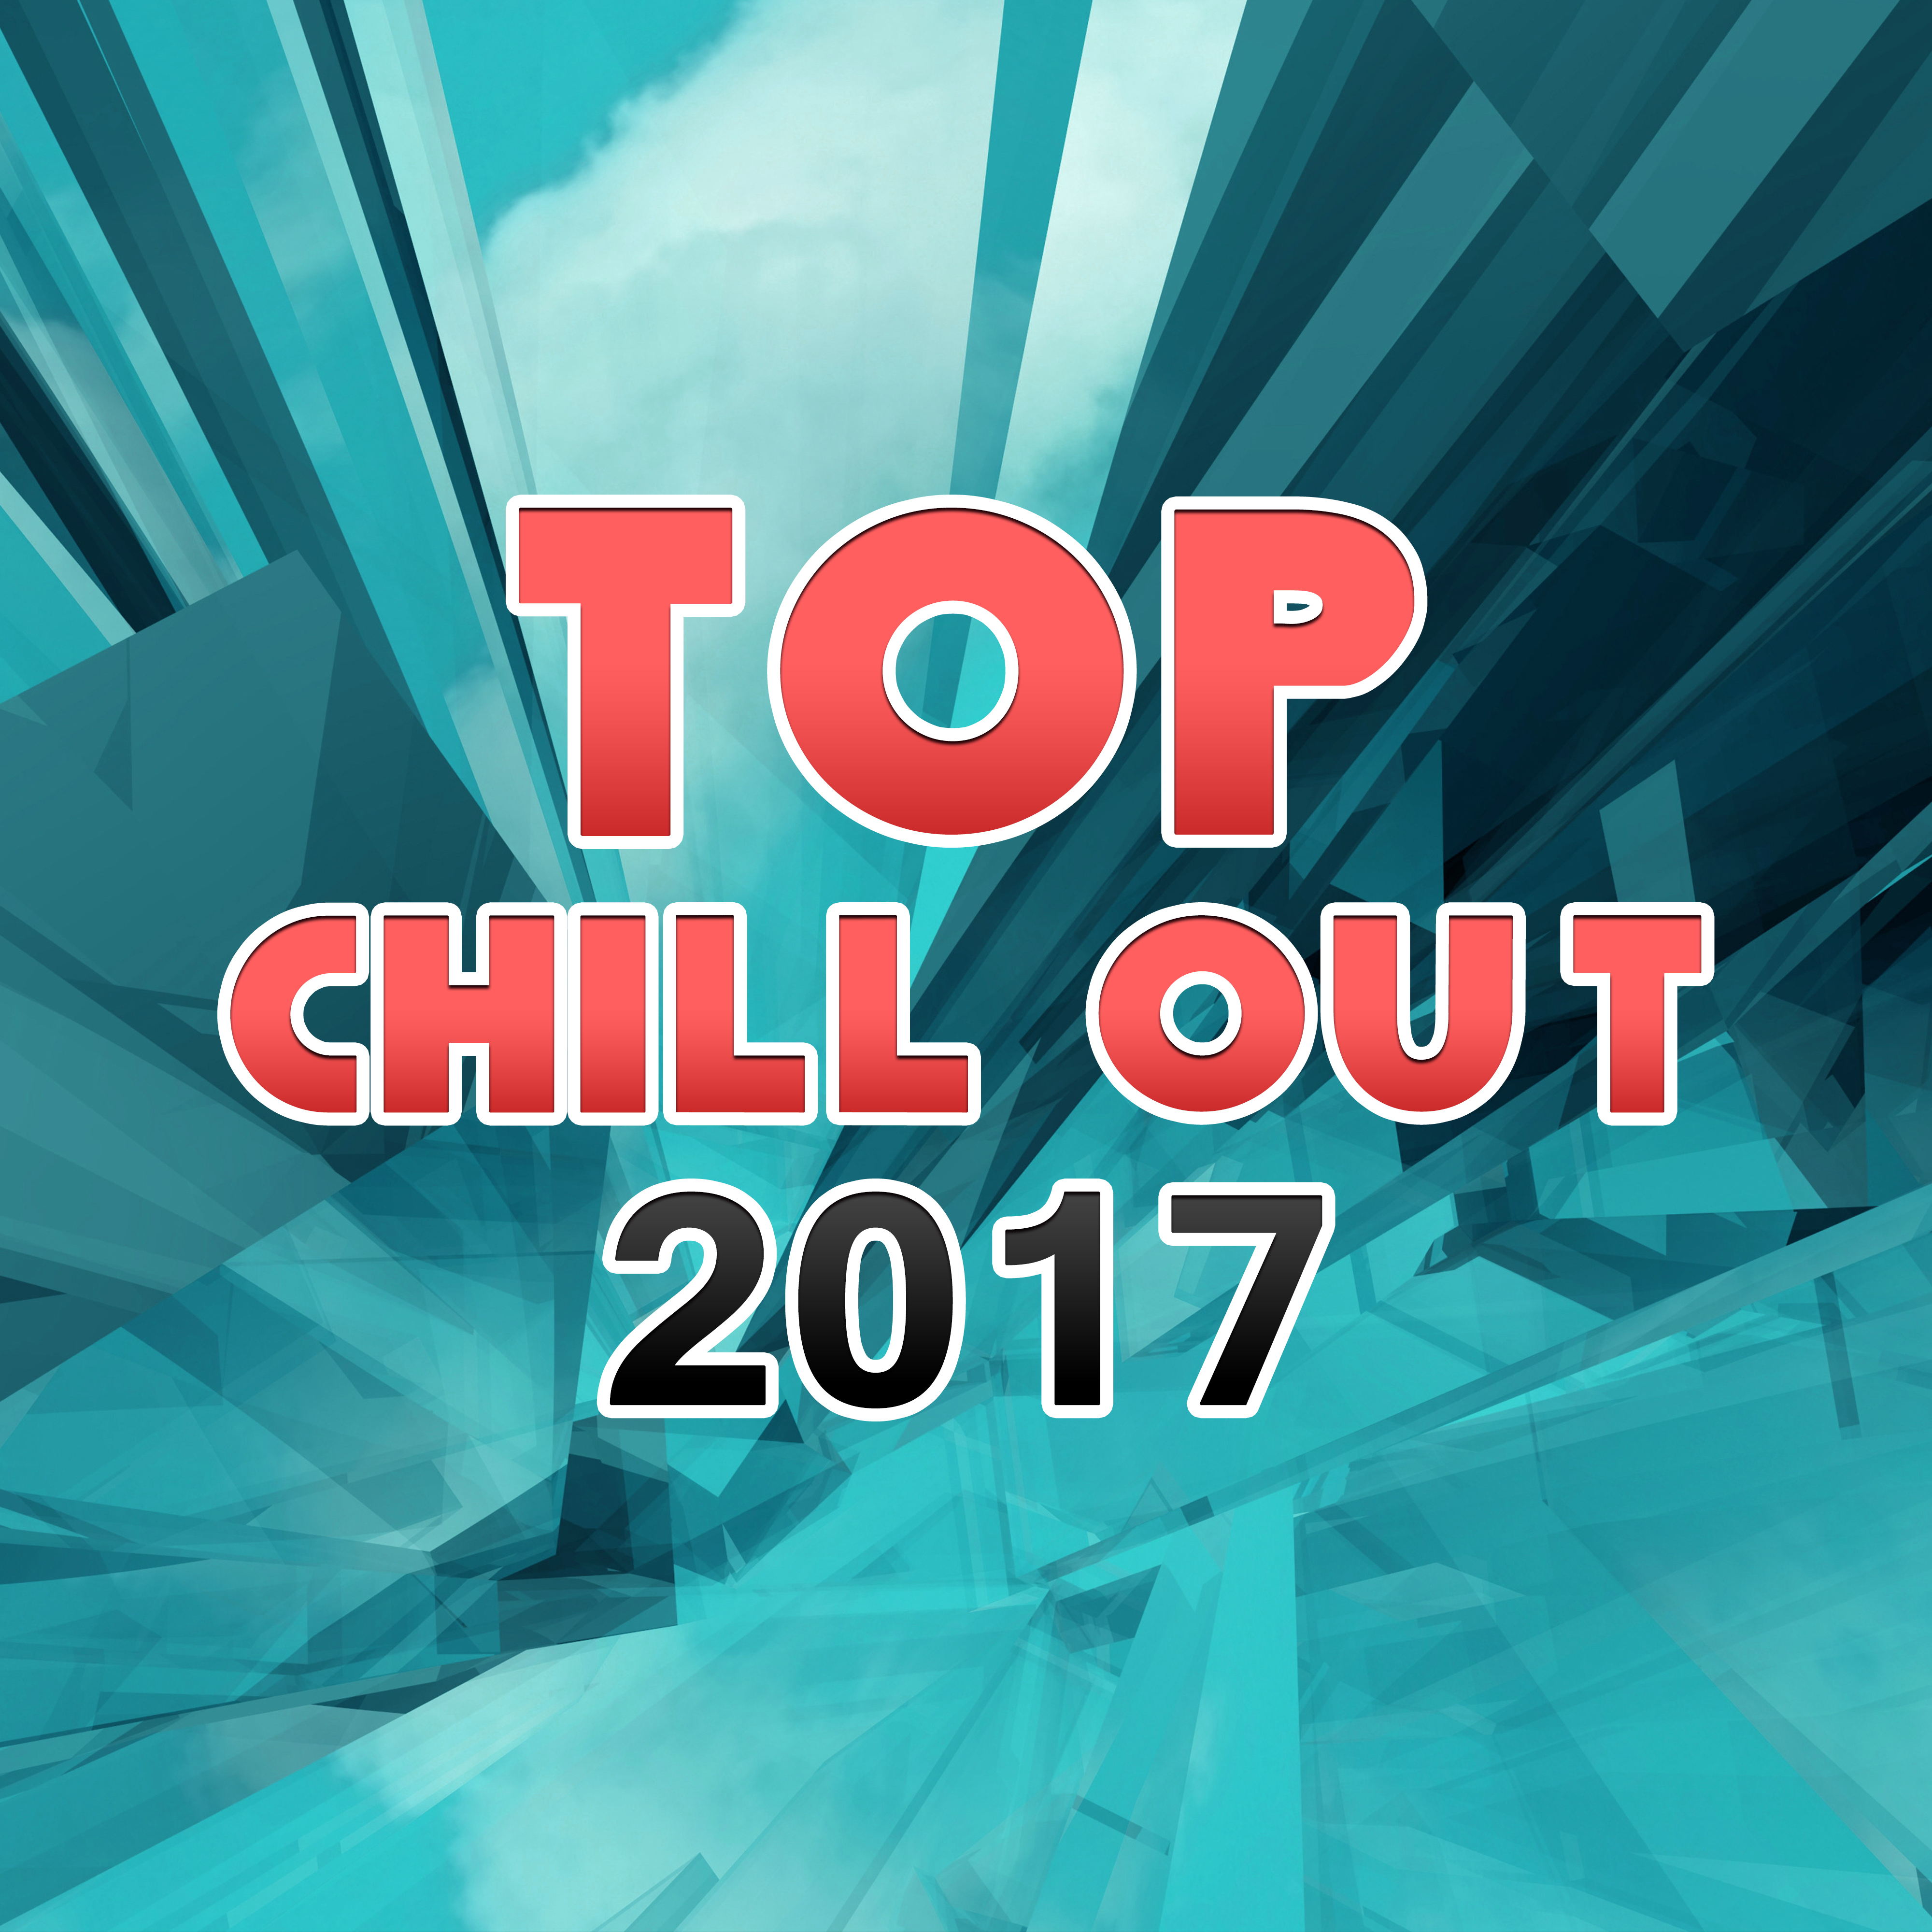 Top Chill Out 2017 – Summer Vibes, Chill Out Music, Holiday, Party Hits, Electronic Beats